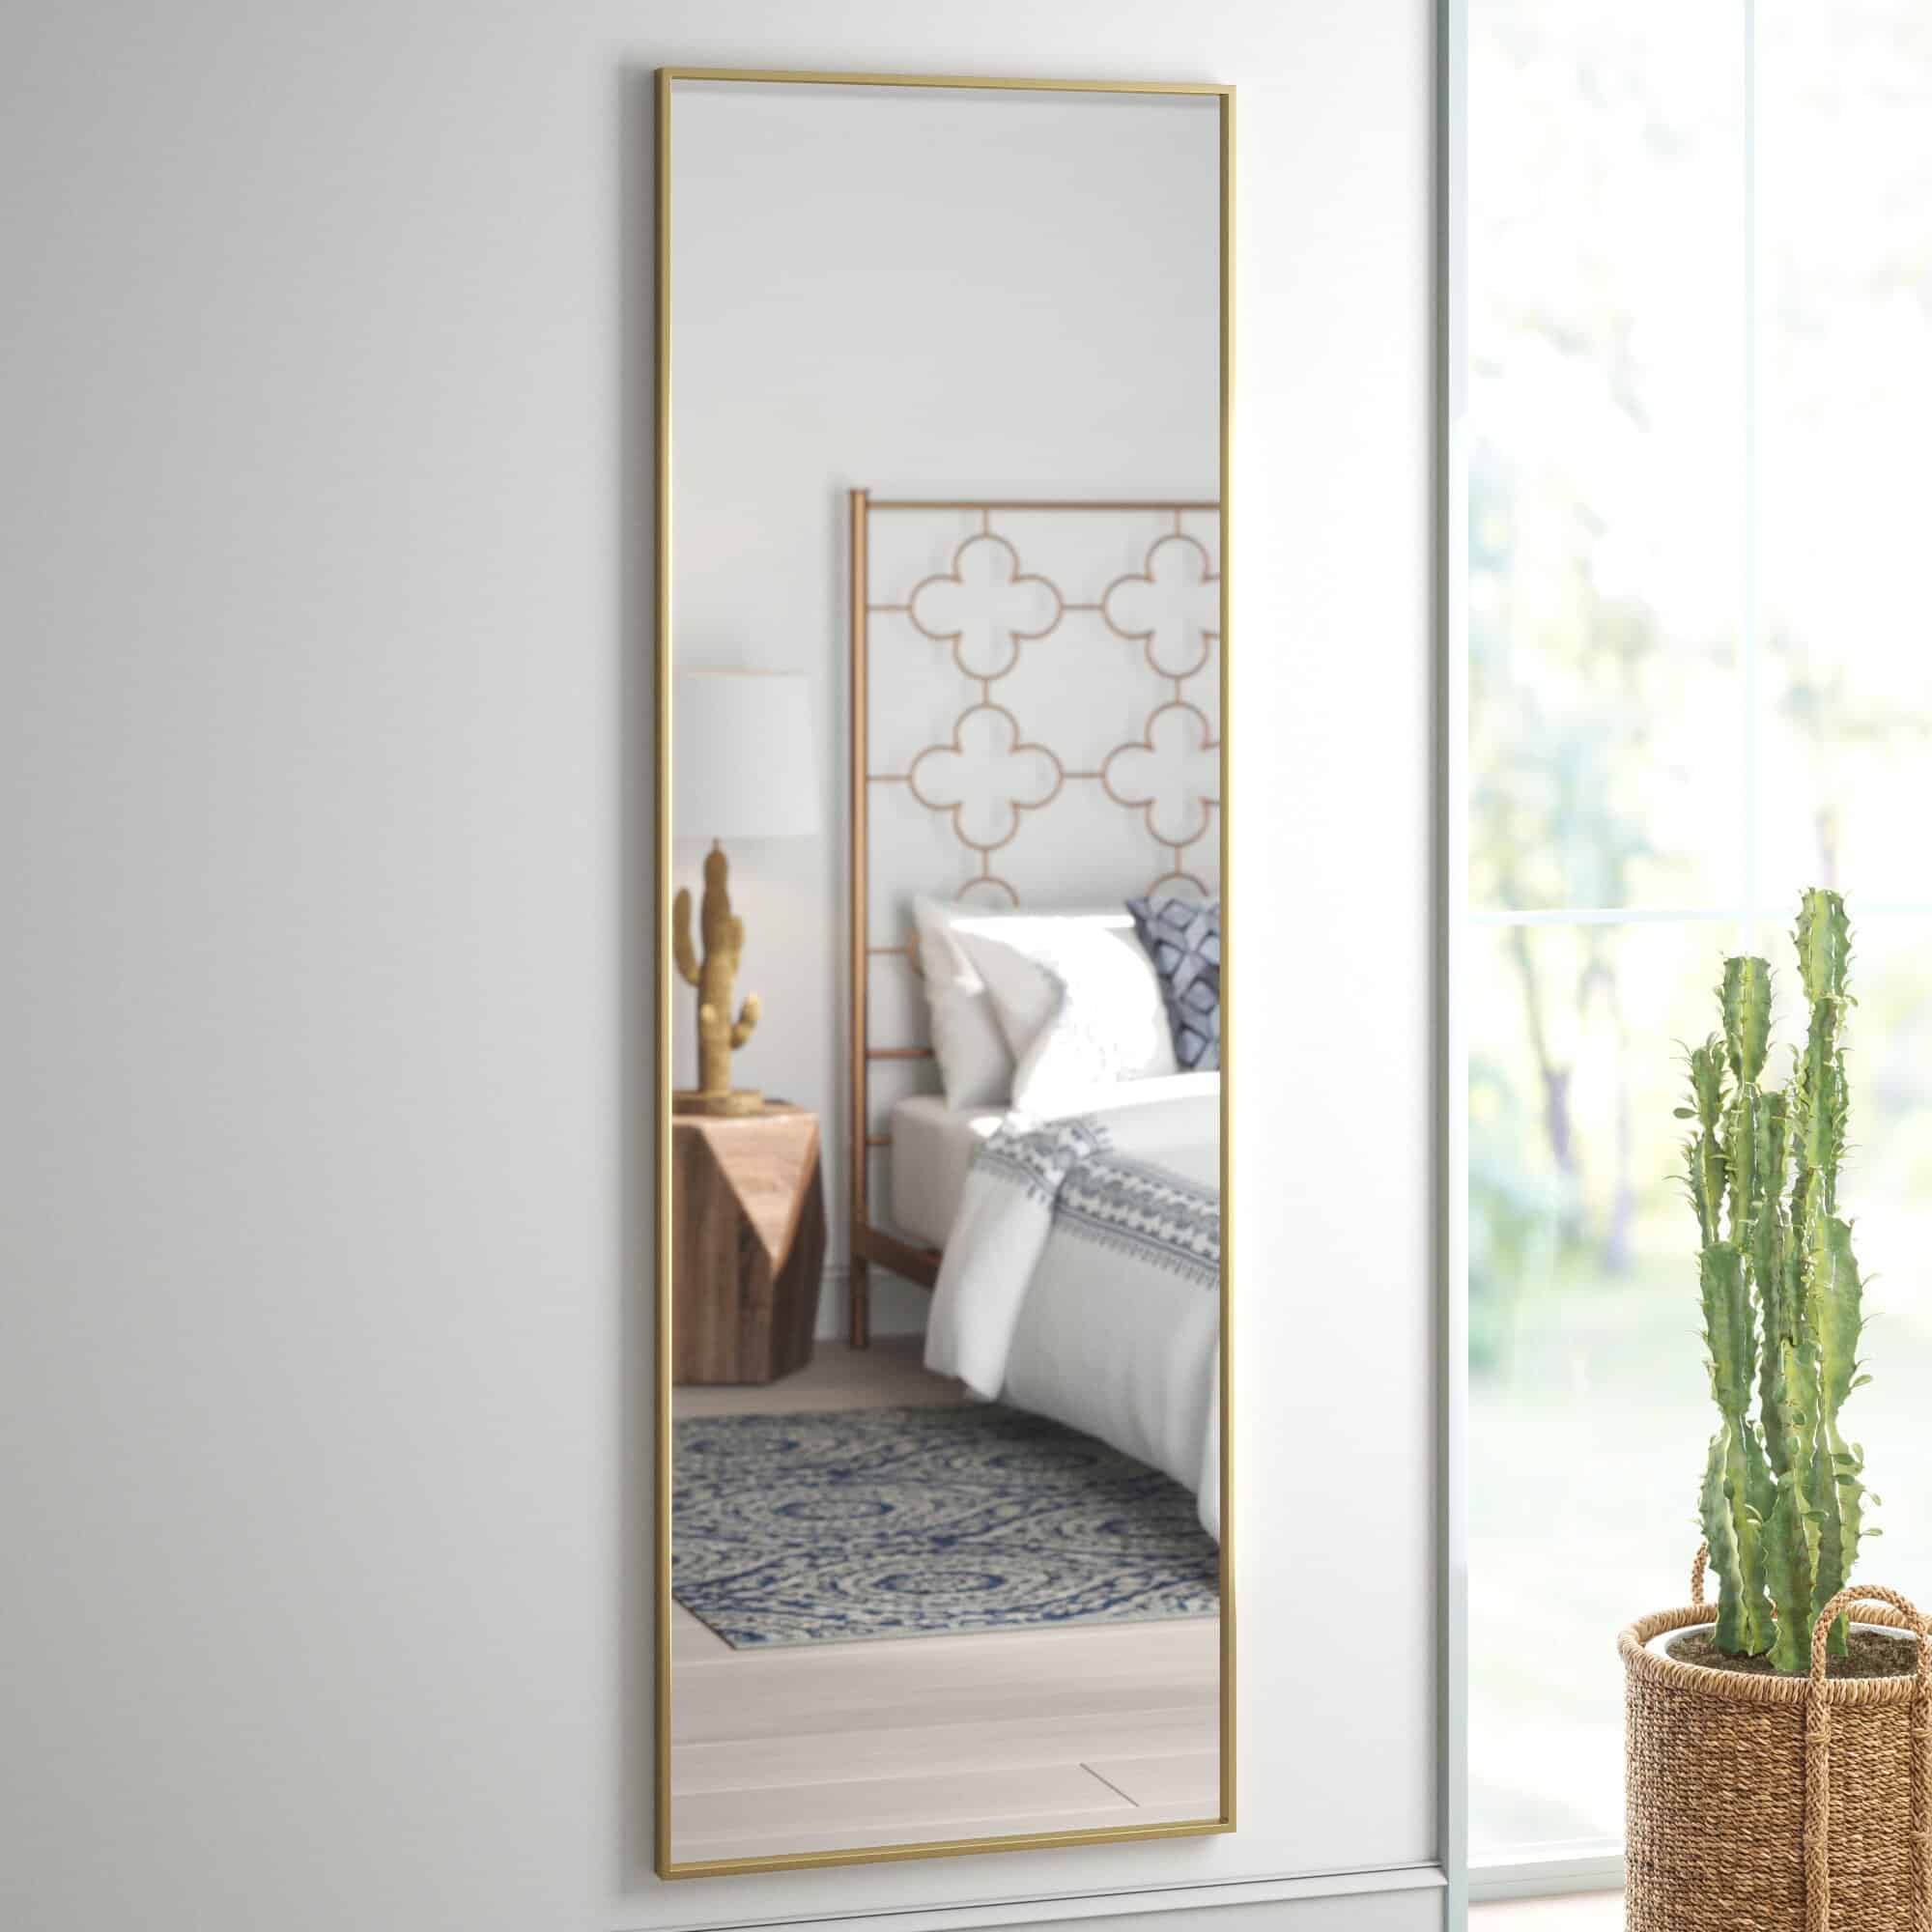 Gold-Rimmed Mirrors Are A Staple Of Lux Decor